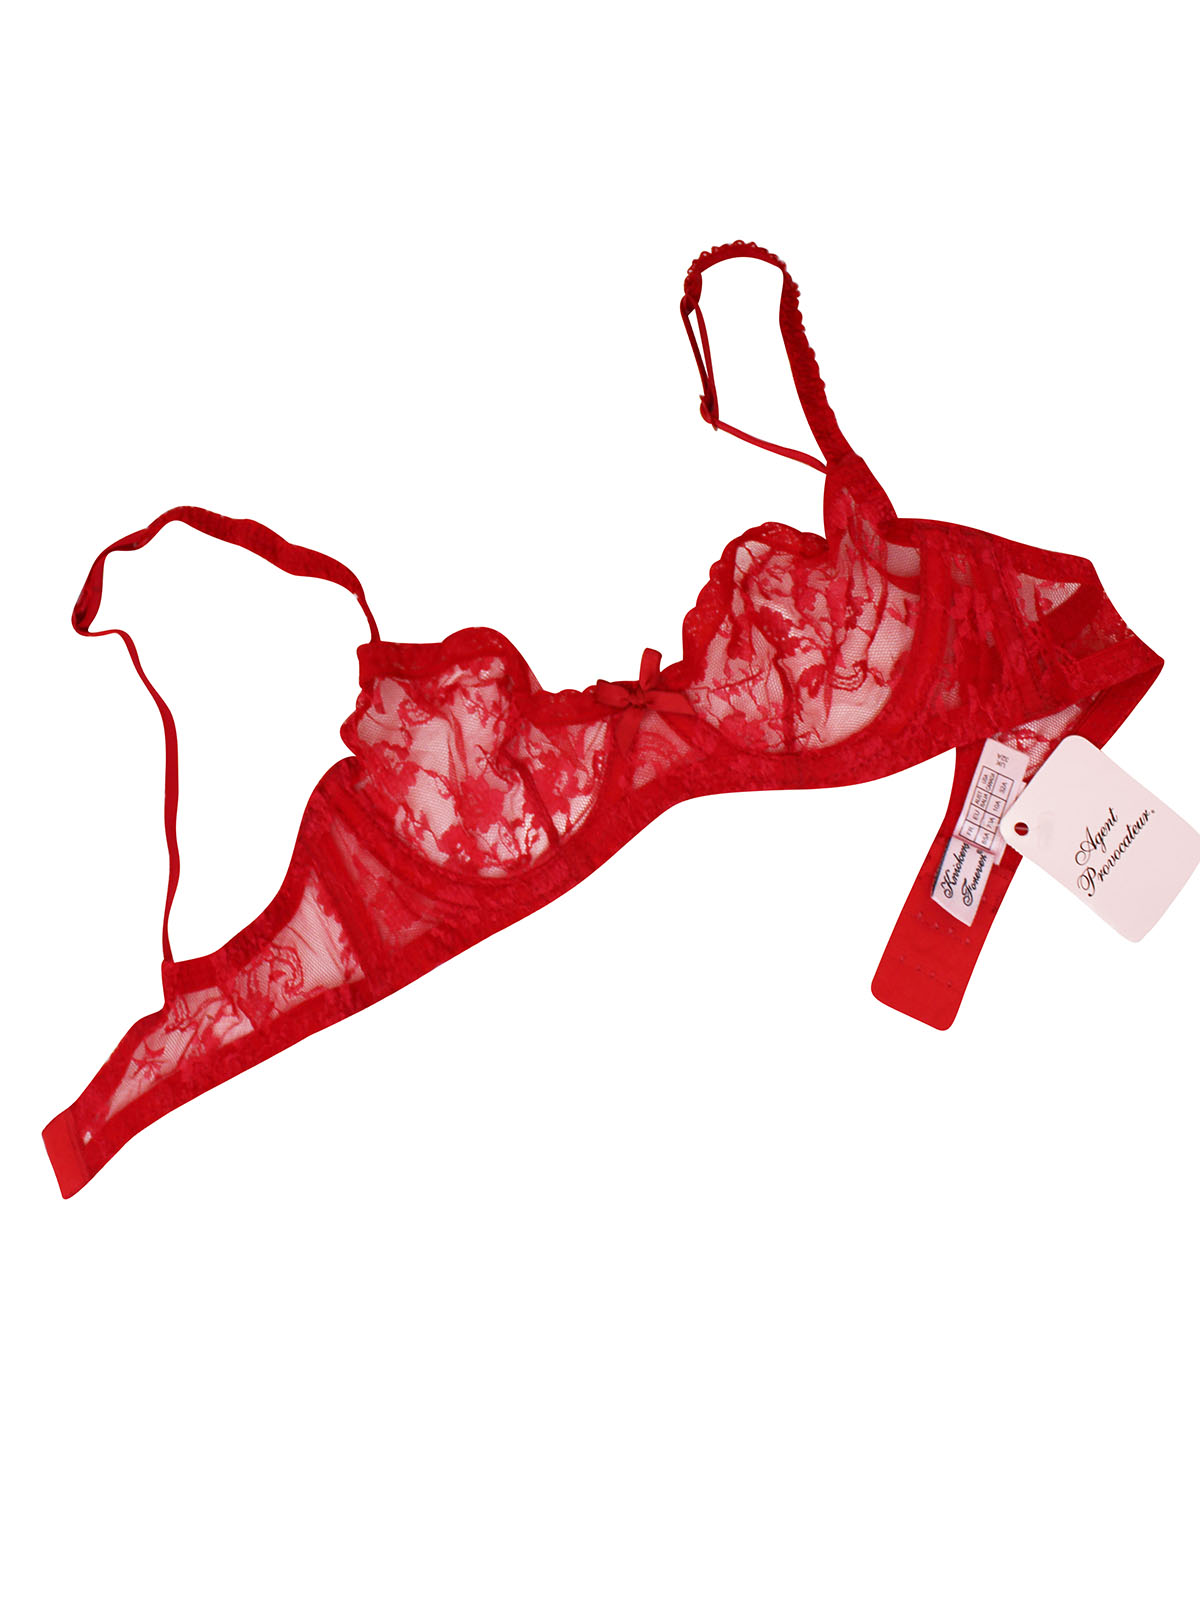 Agent Provocateur - - AG3NT Provocateur RED Shazam Lace Wired Balcony Bra -  Size 32 to 36 (A-C)